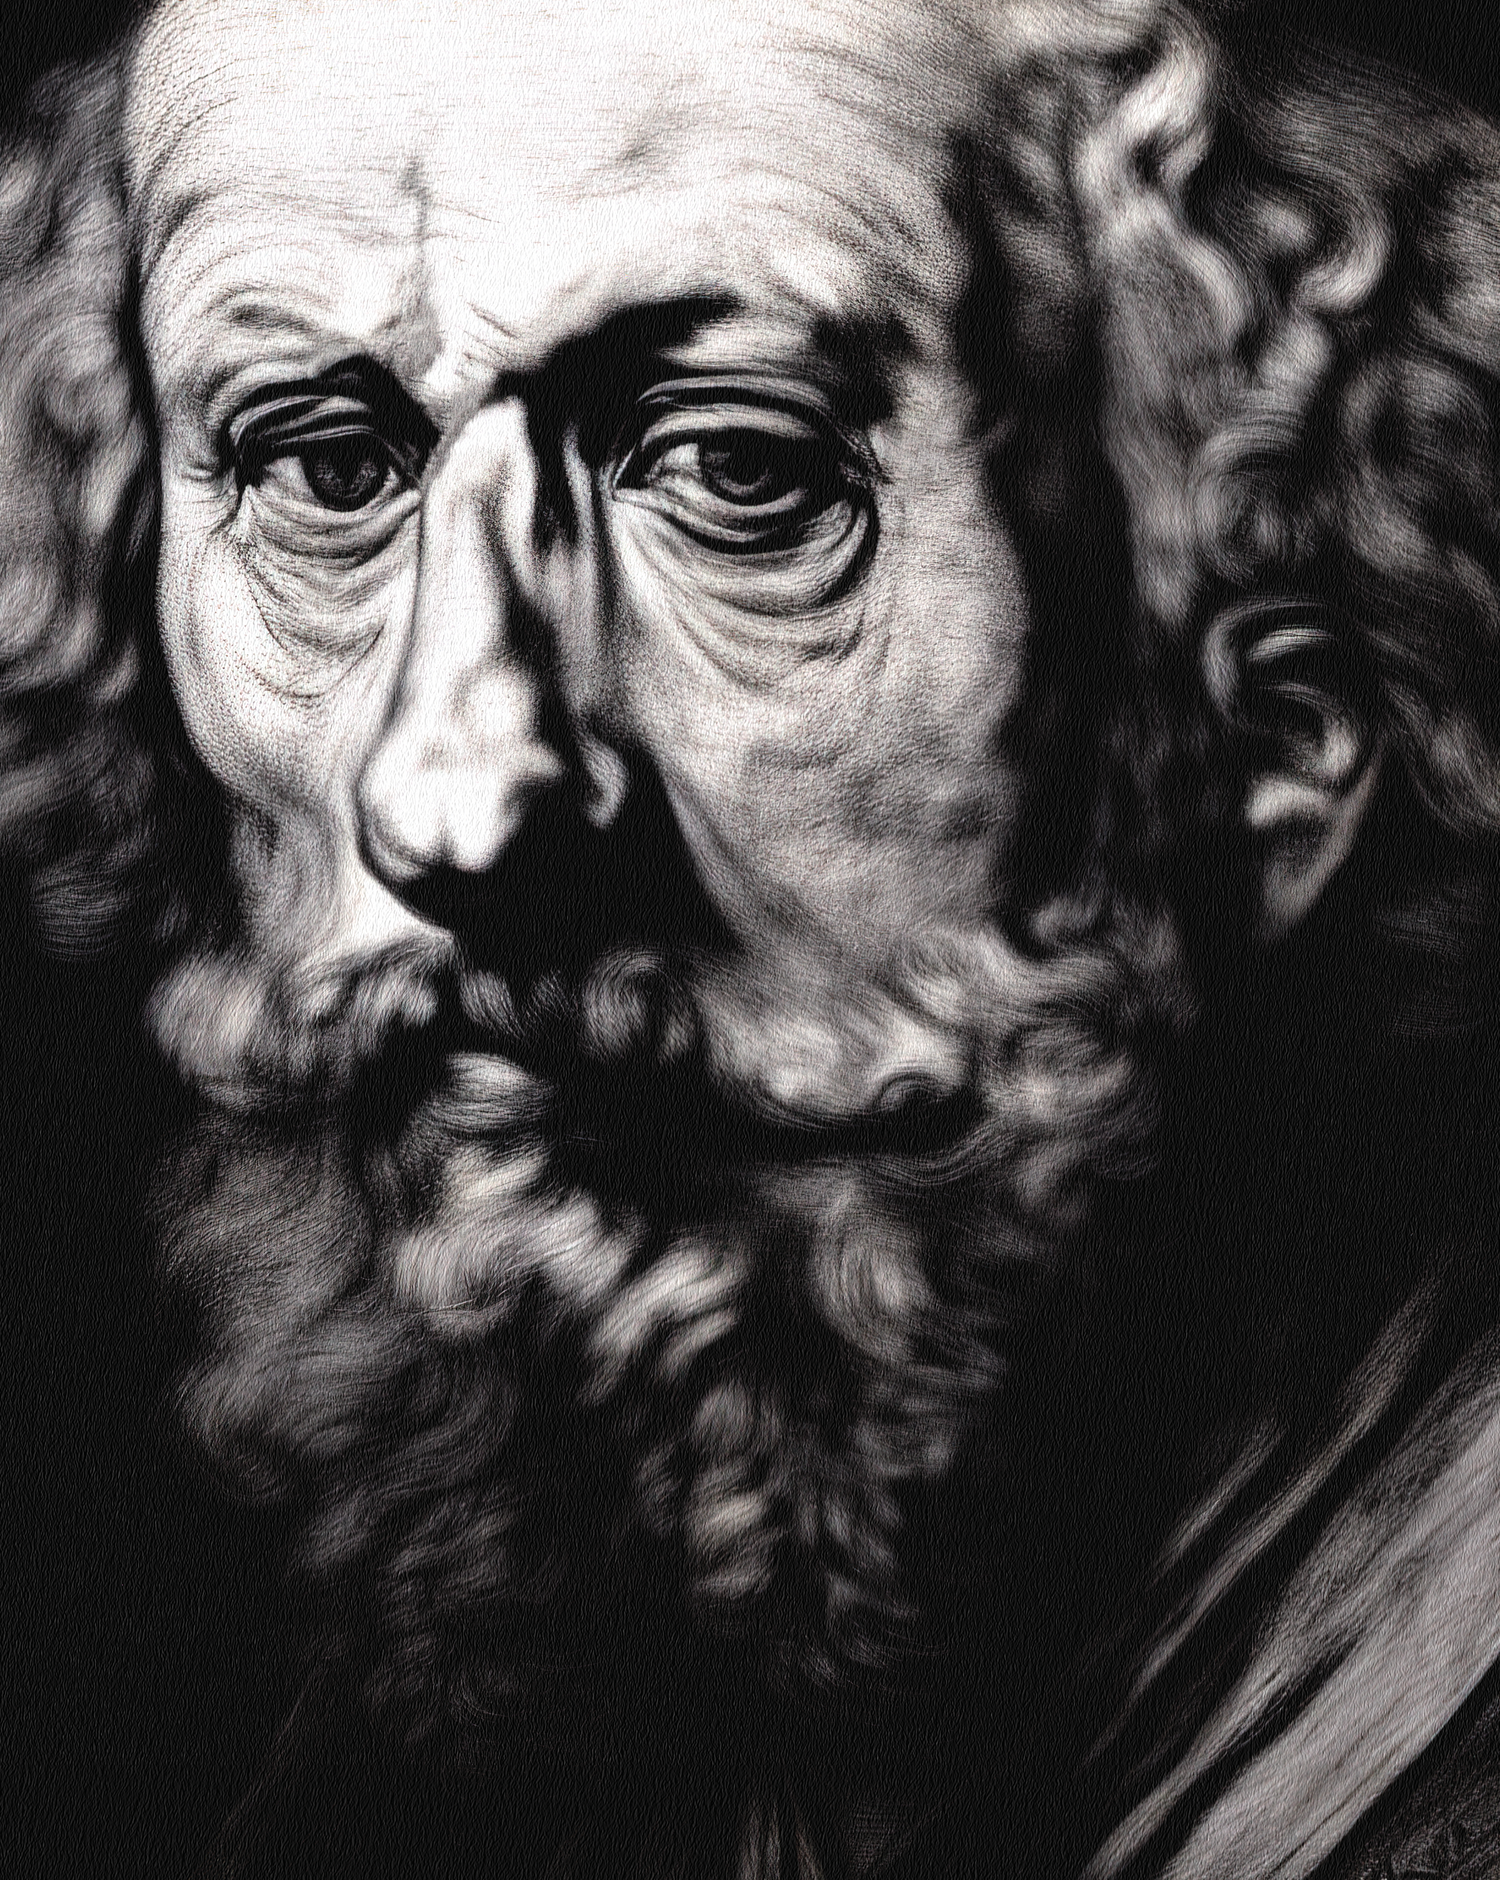 An AI generated portrait of Rembrandt van Rijn in the style of a realistic drawing